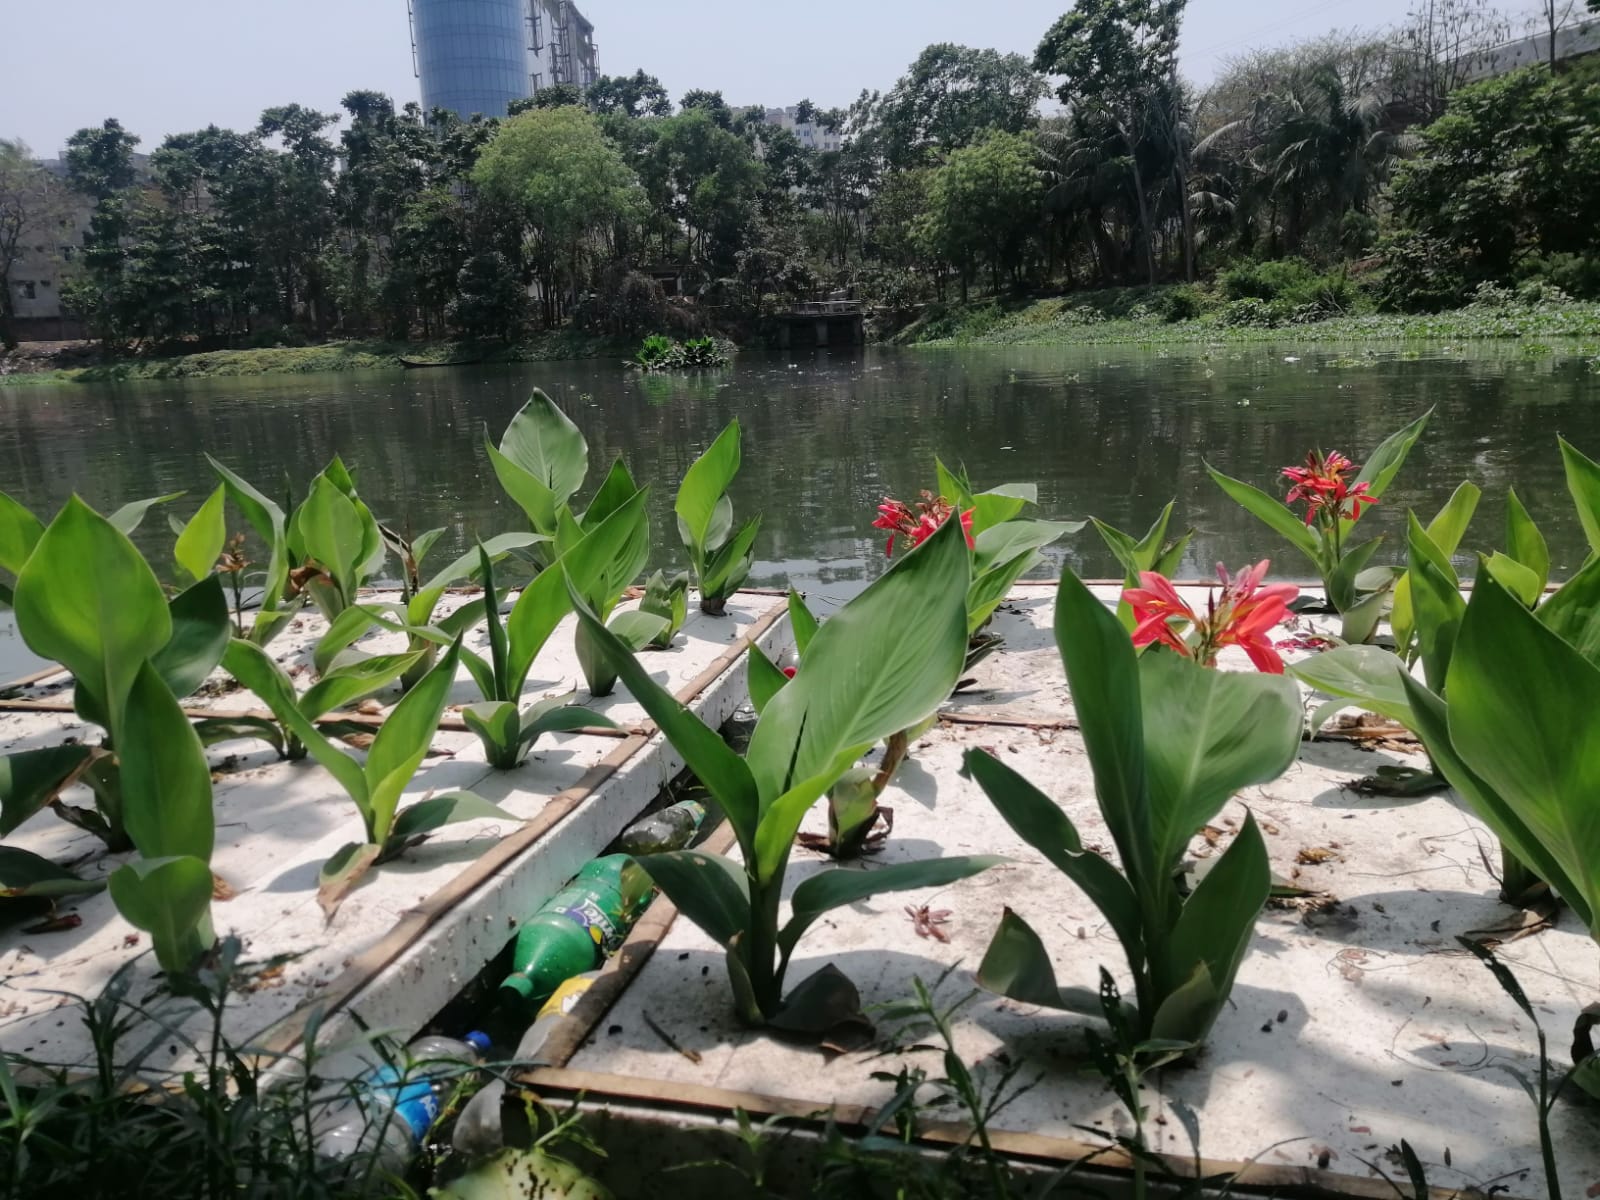 polluted-lakes-are-being-cleansed-using-floating-wetlands-made-of-trash